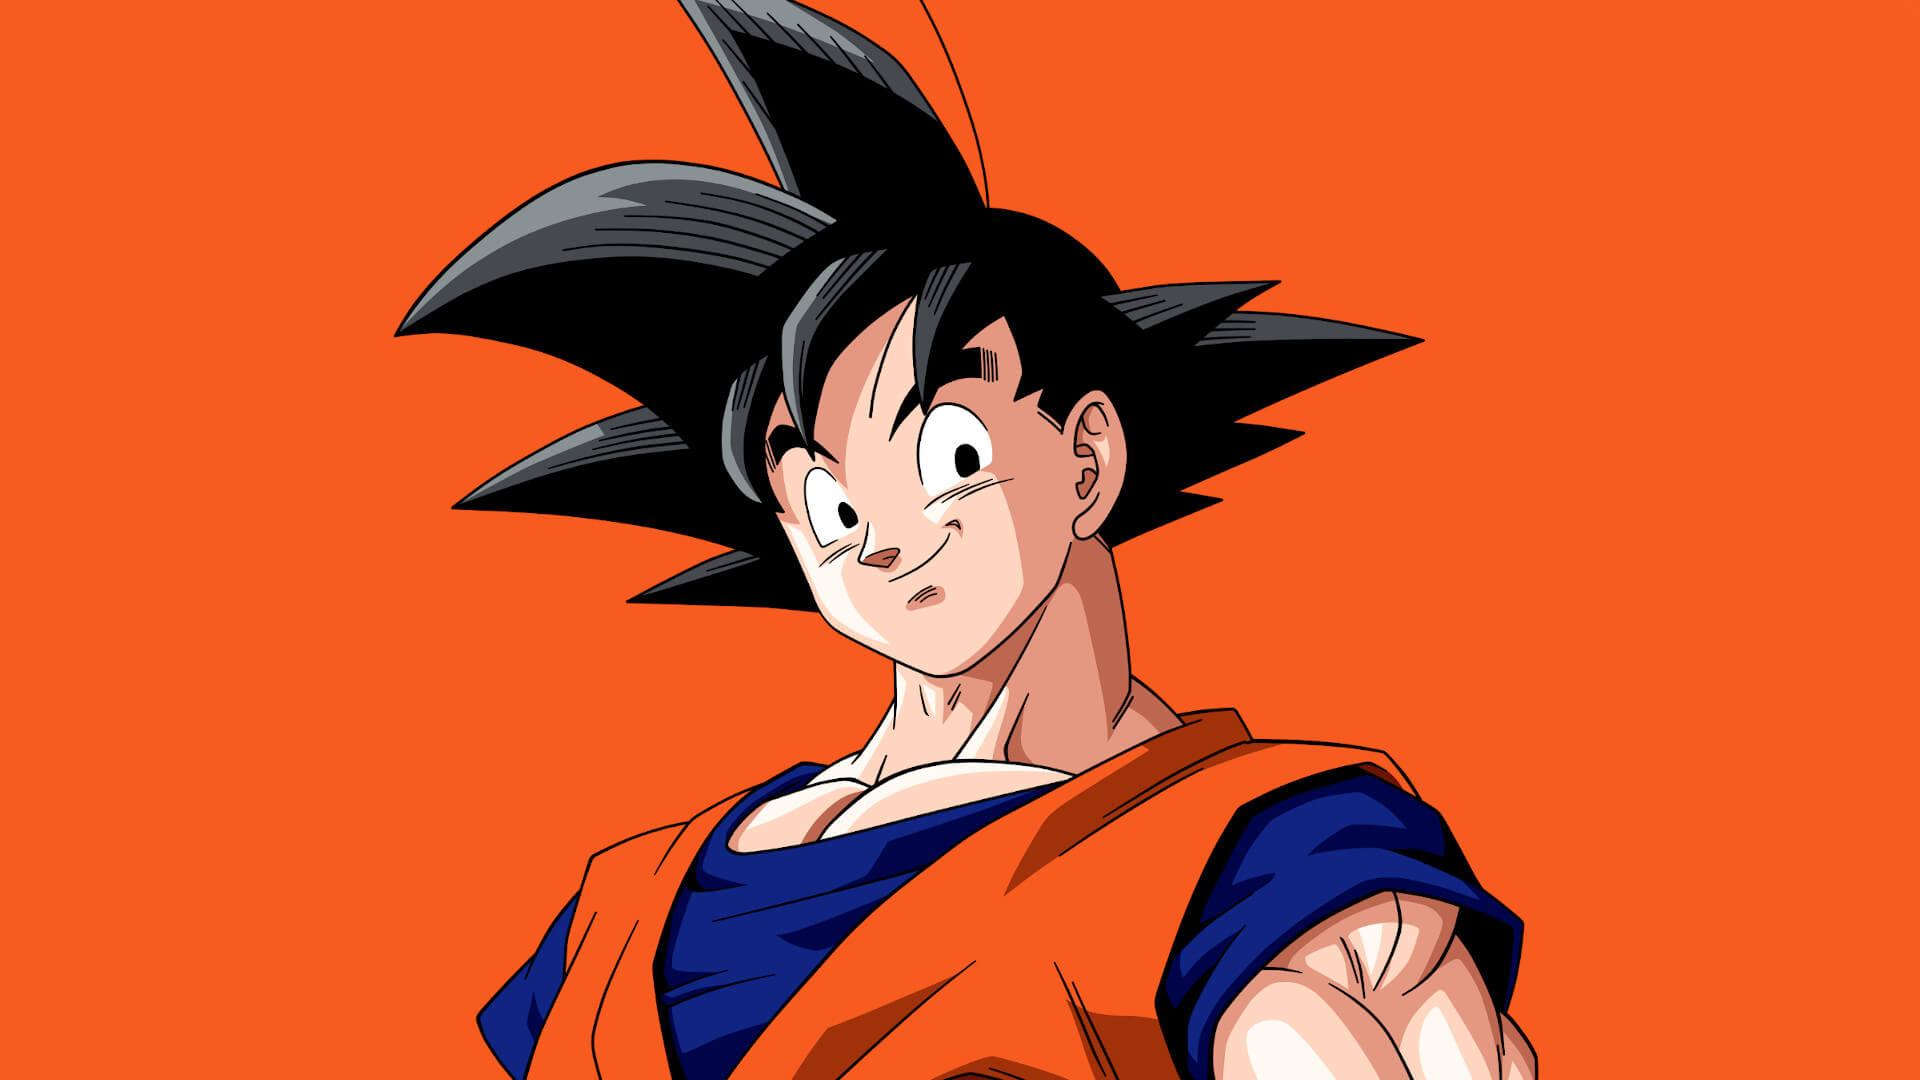 delvon lynch recommends pictures of goku pic